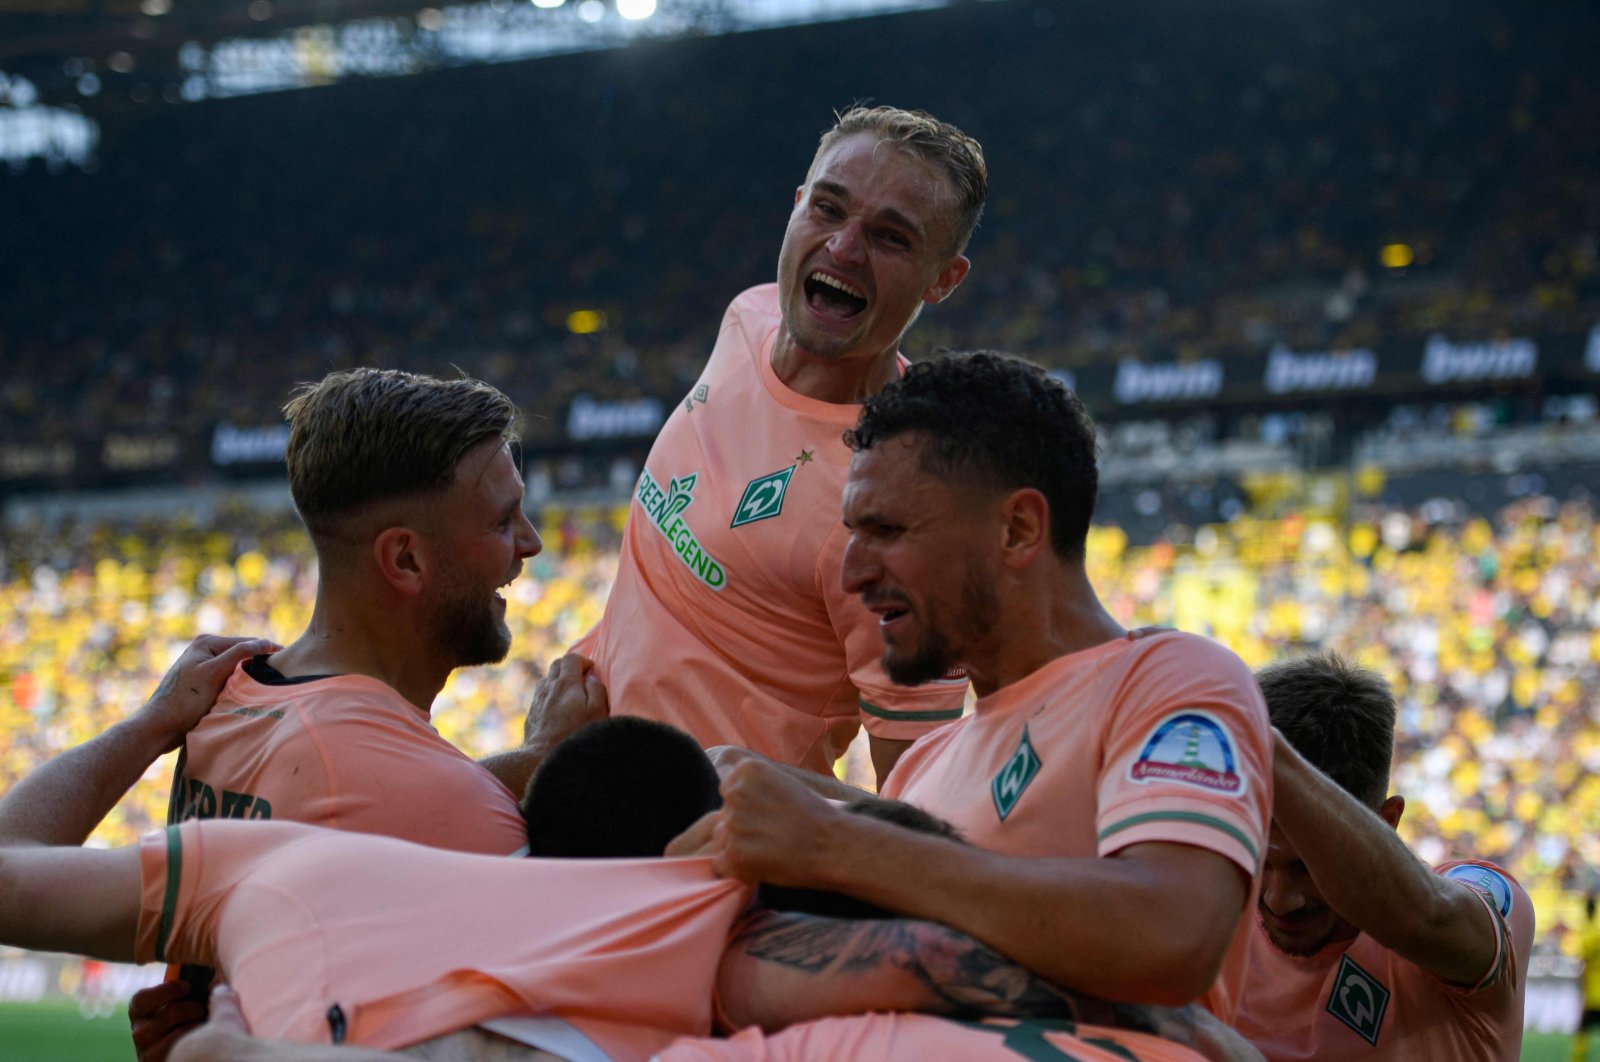 Werder Bremen players celebrate their third goal in the Bundesliga football match between Borussia Dortmund and SV Werder Bremen in Dortmund, western Germany, Aug. 20, 2022. (AFP Photo)